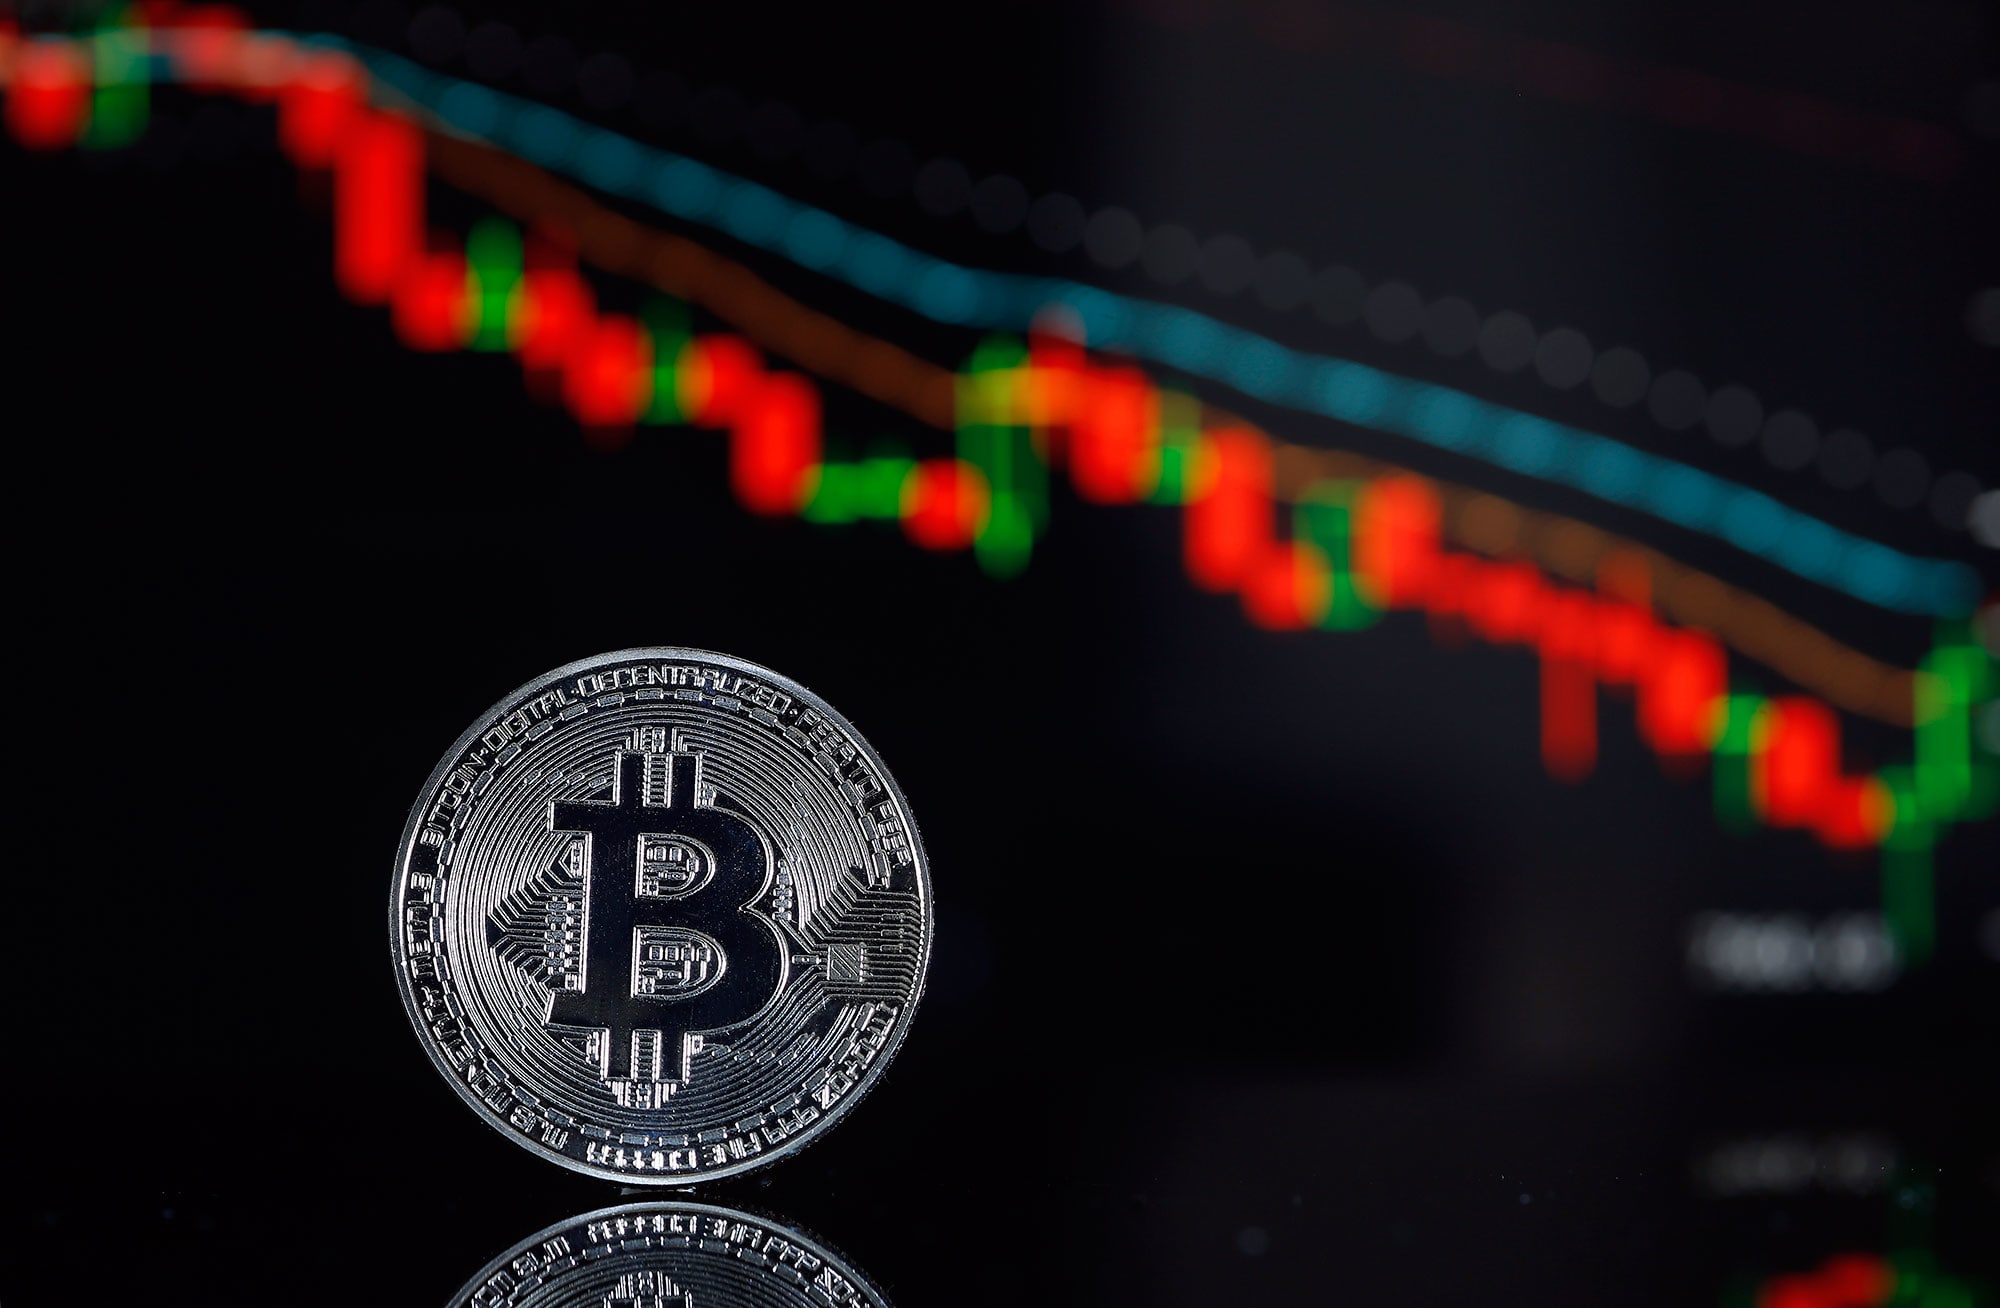 Cryptocurrency trading volume plunges as interest wanes ...